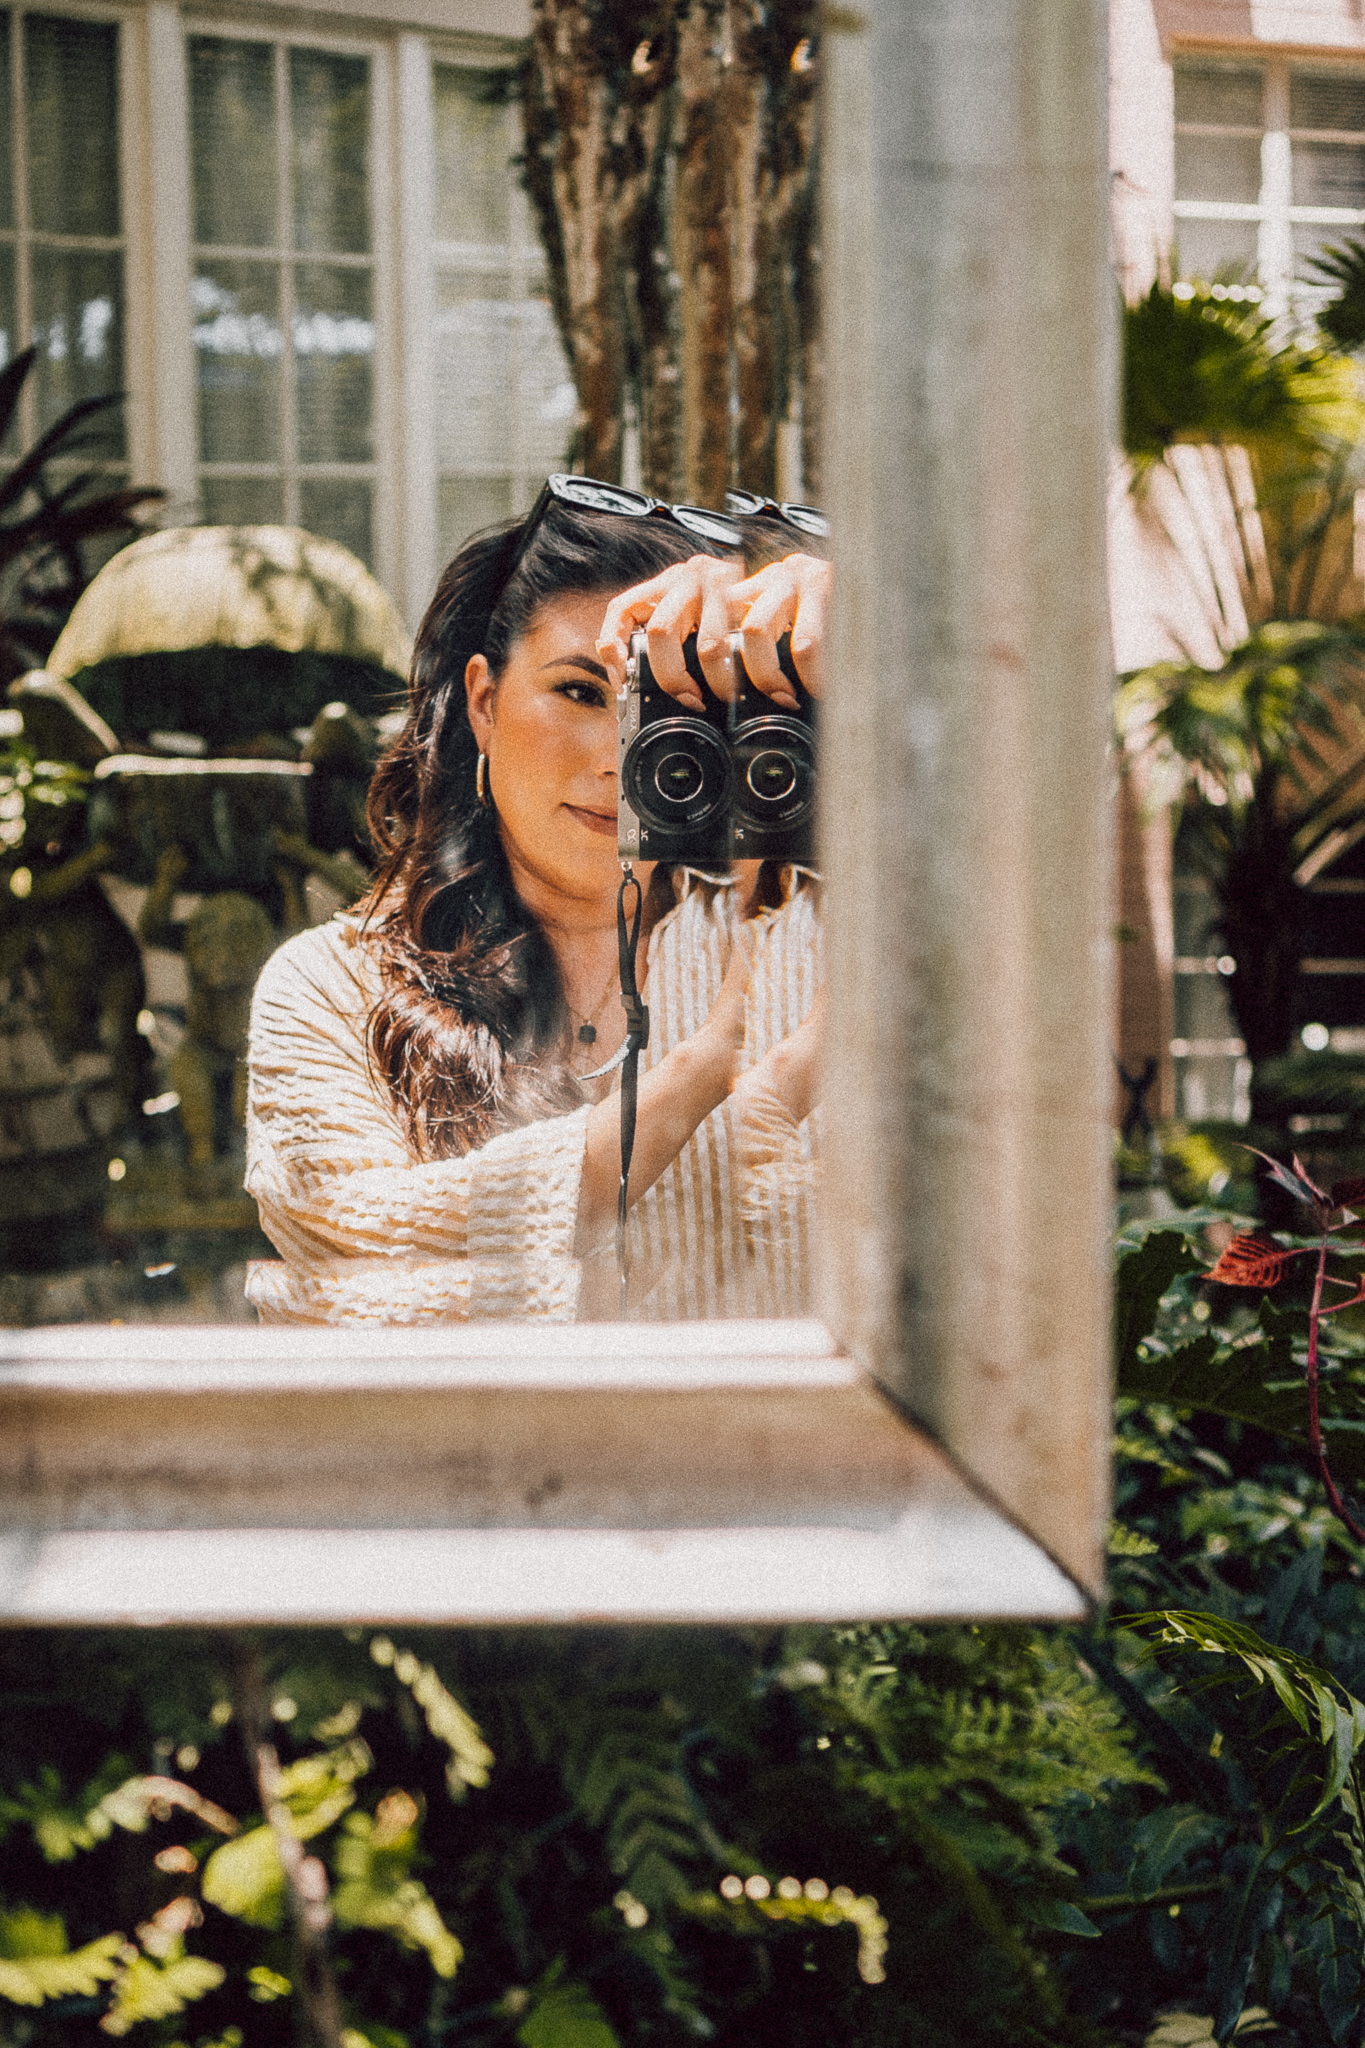 Latina woman taking a photo of herself in the mirror